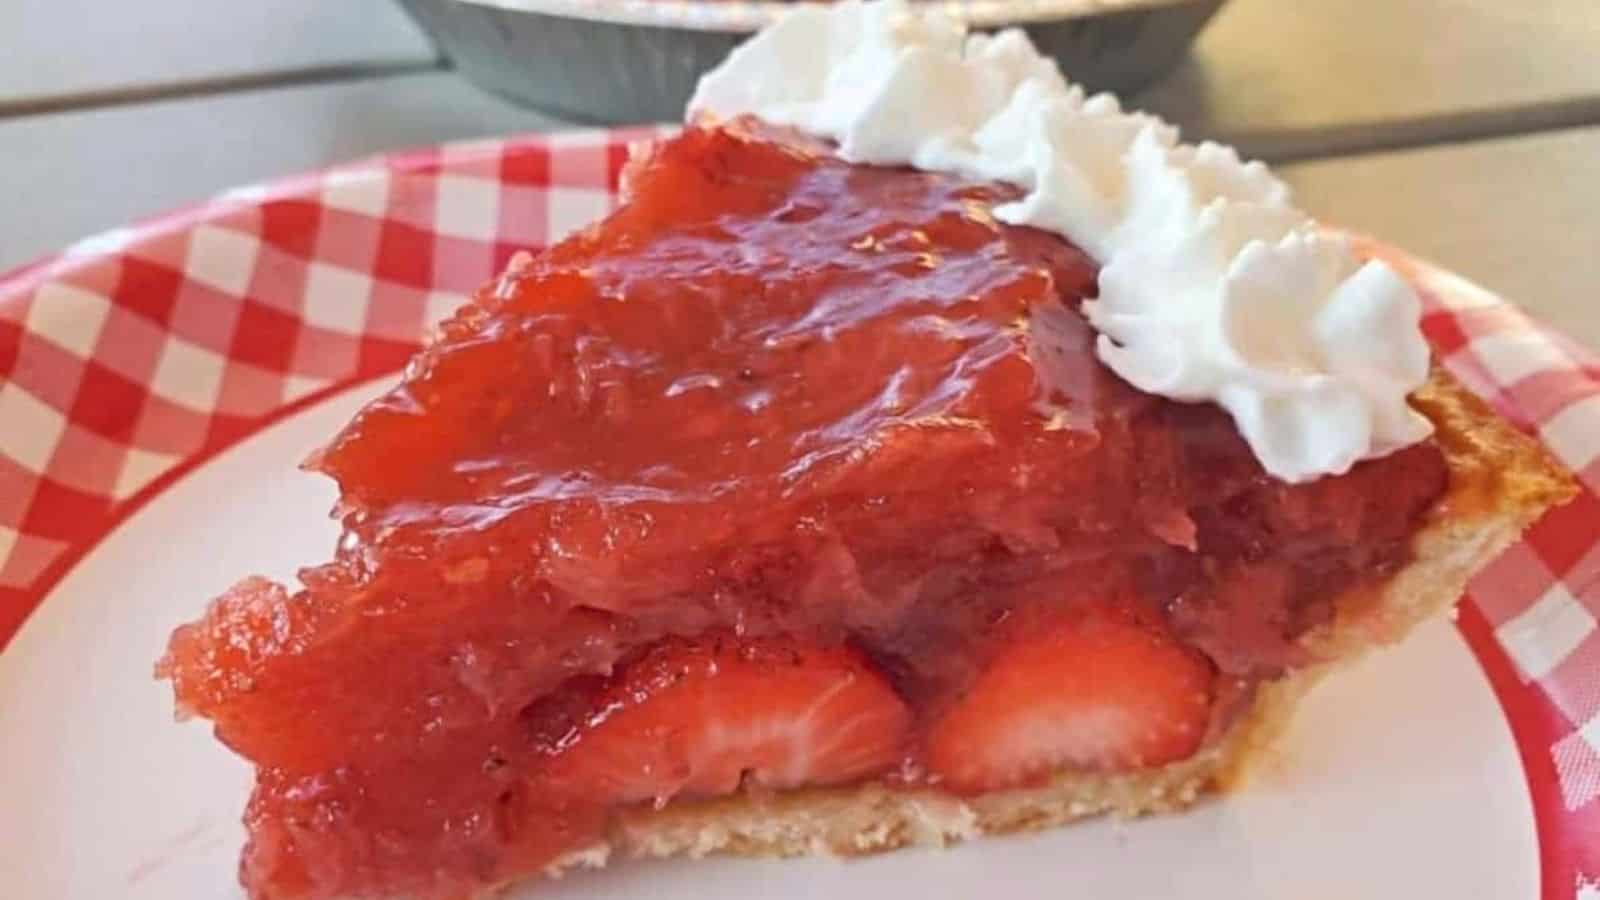 Slice of strawberry pie on a plate with the whole pie in the background.